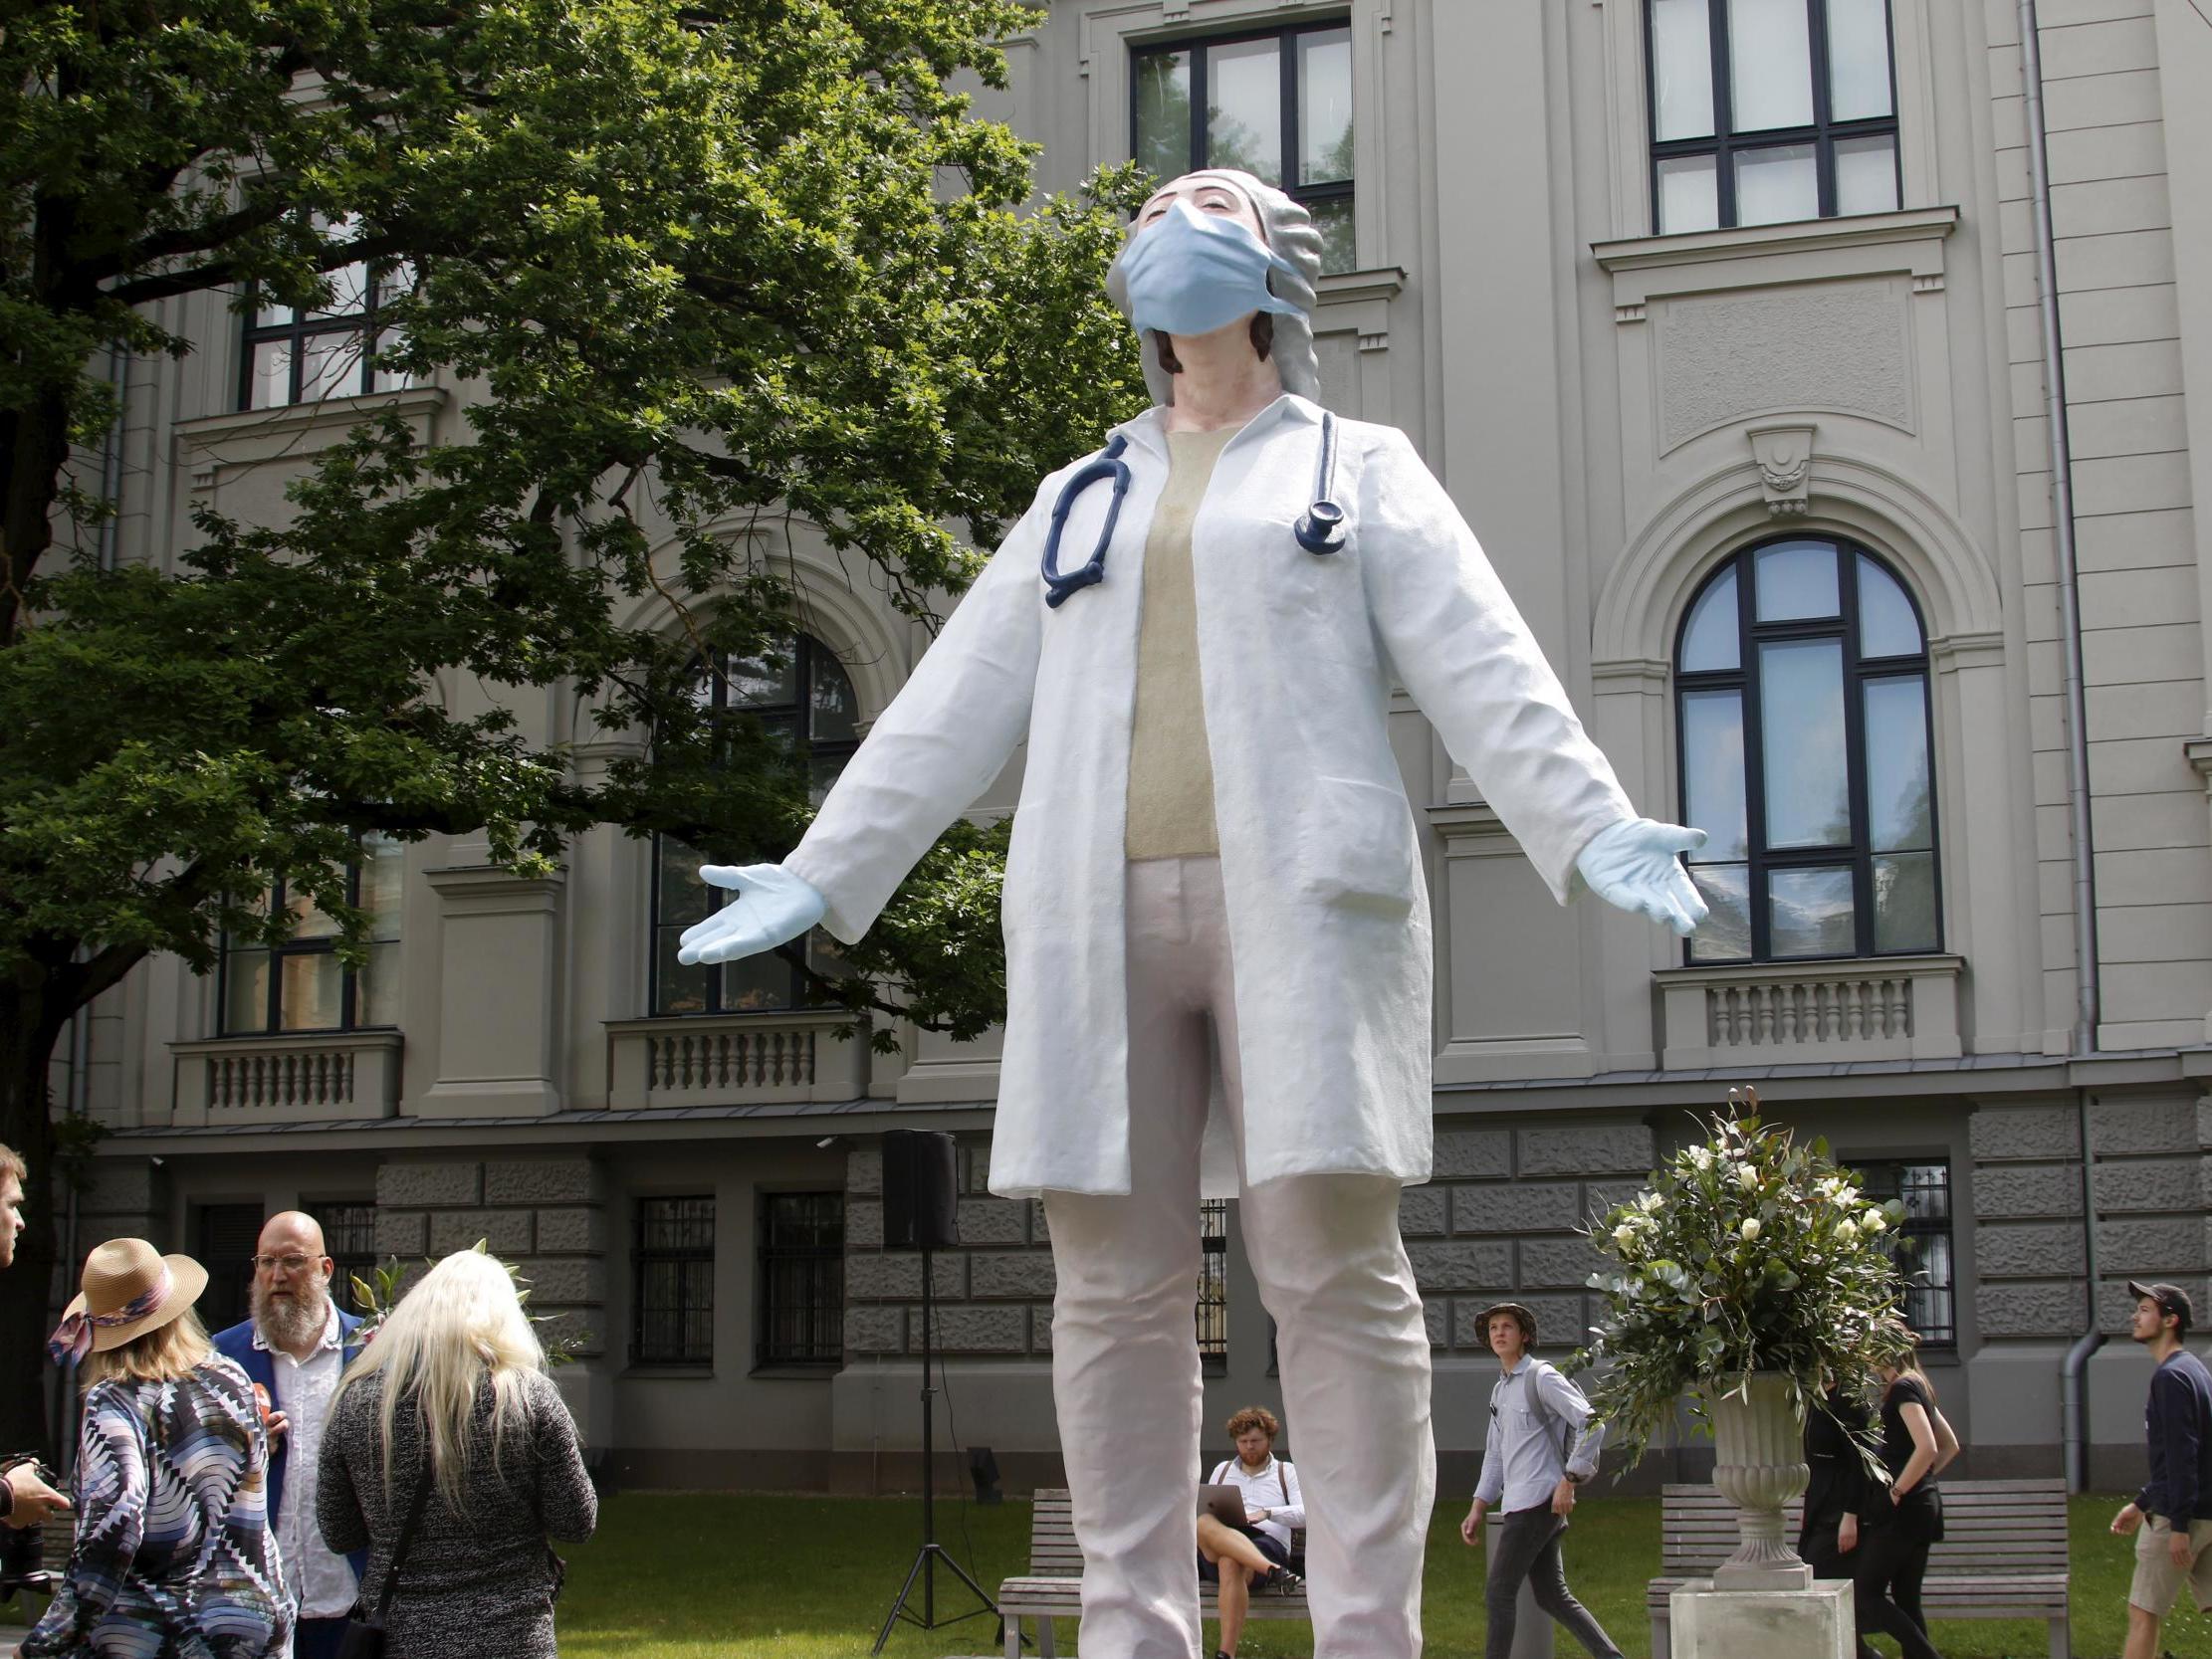 A statue called 'Medics To The World' by sculptor Aigars Bikse has been unveiled in Latvia in tribute to all health professionals